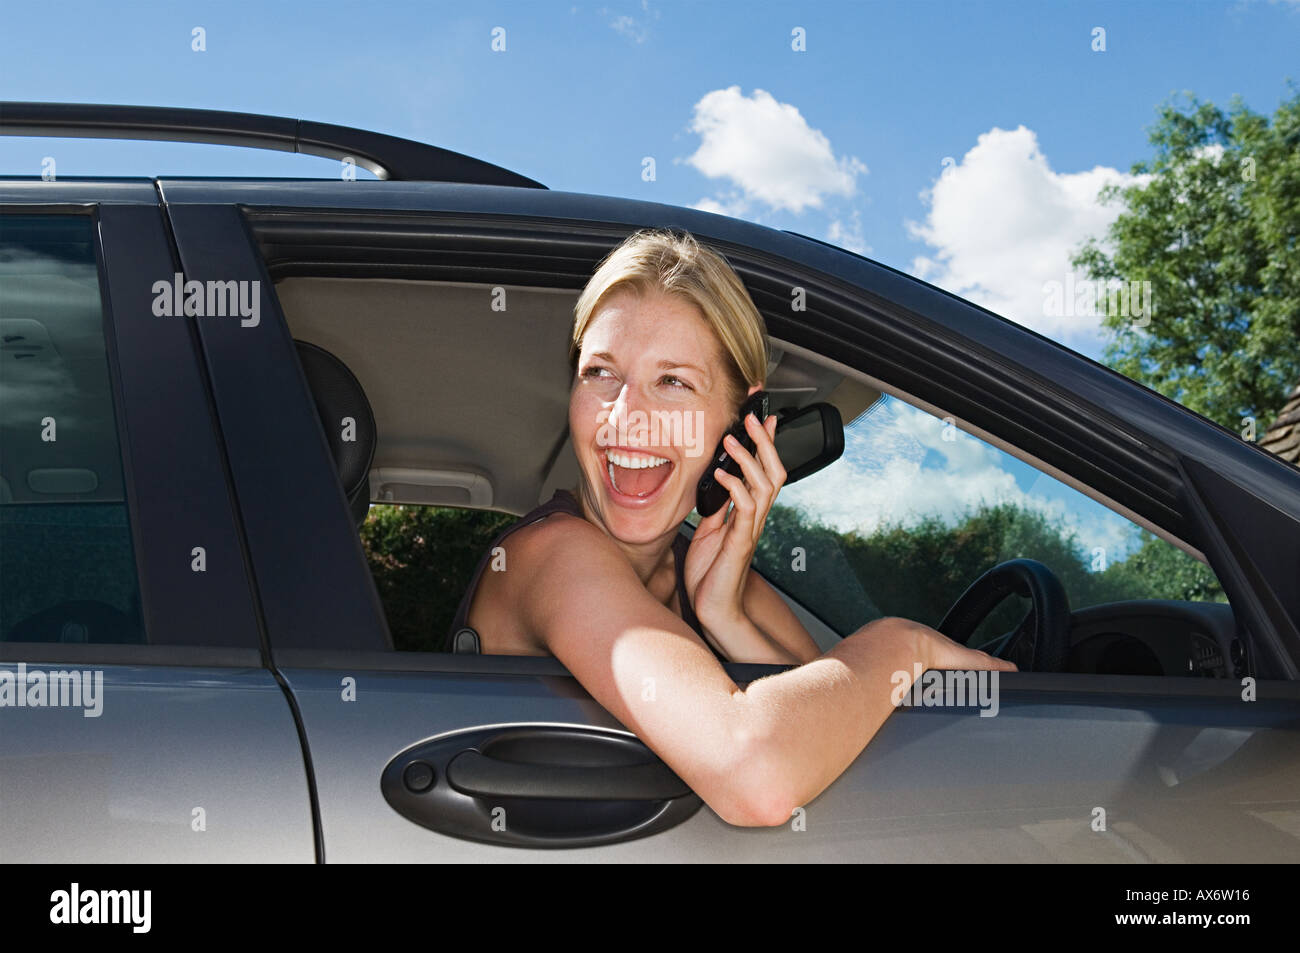 Woman in car using mobile phone Stock Photo